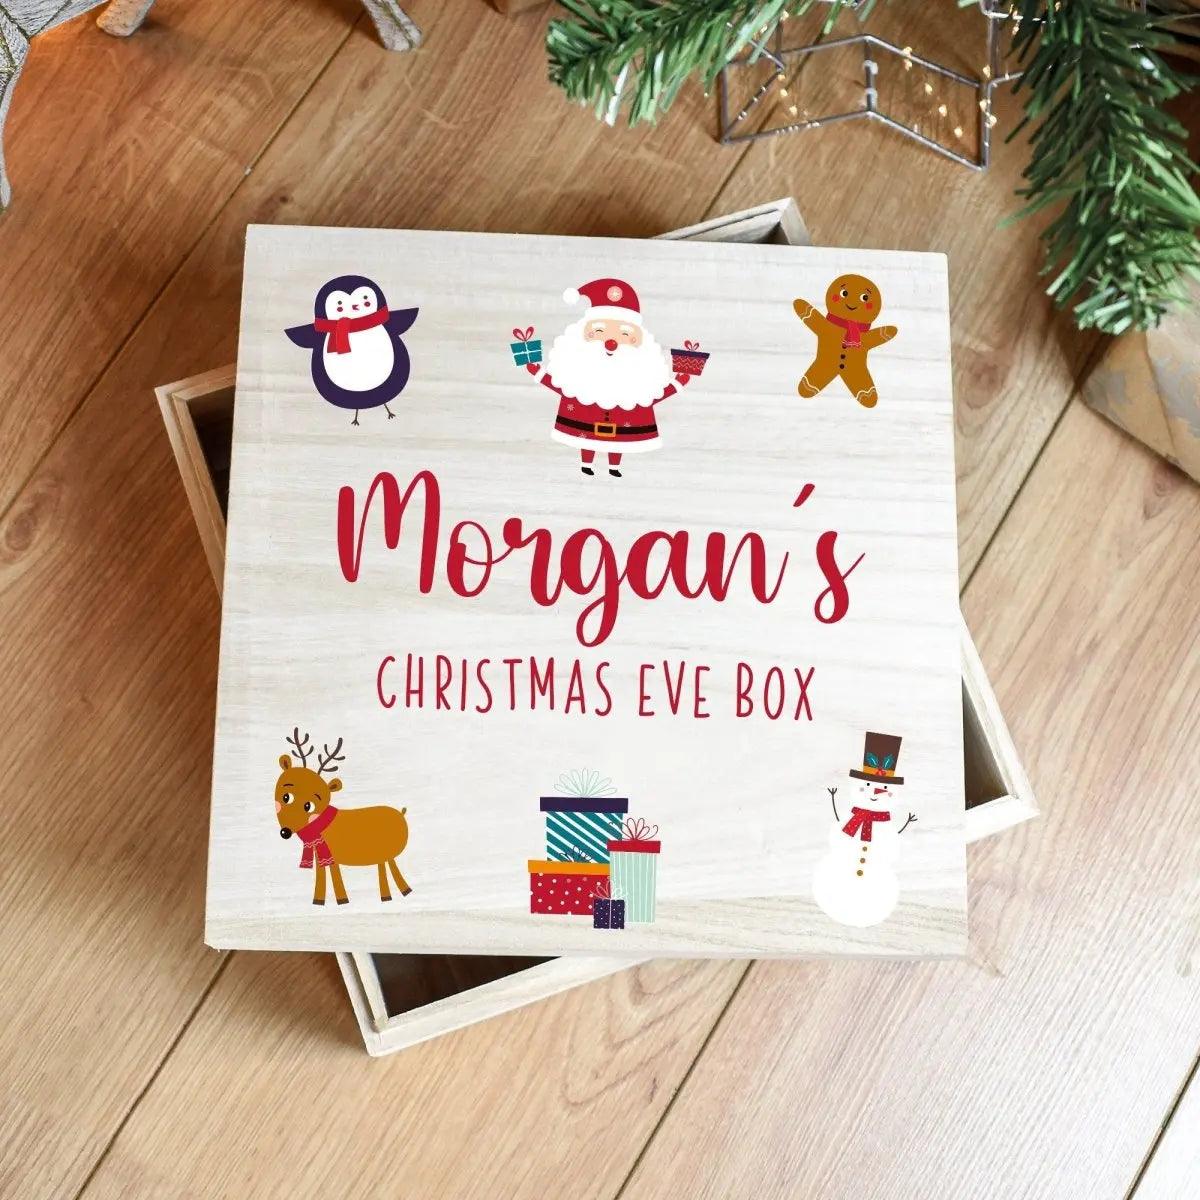 Personalised Christmas Box, Child Christmas Eve Crate, Printed Wooden Box, Luxury Gift Box, Large Christmas Box, Kids Christmas Wood Box